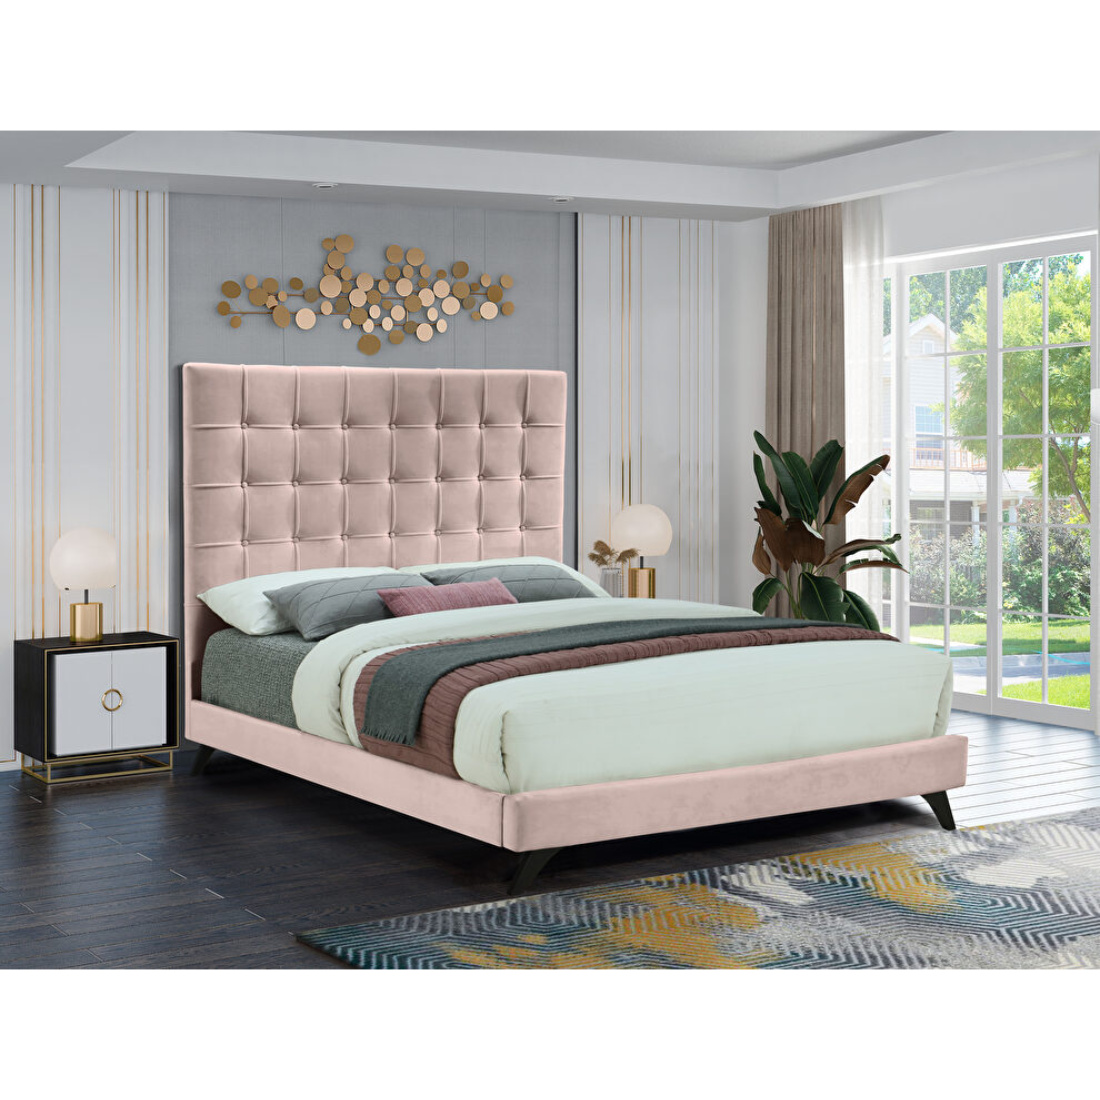 Sylvia Queen Size Upholstered Bed, Pink Tufted Headboard Queen